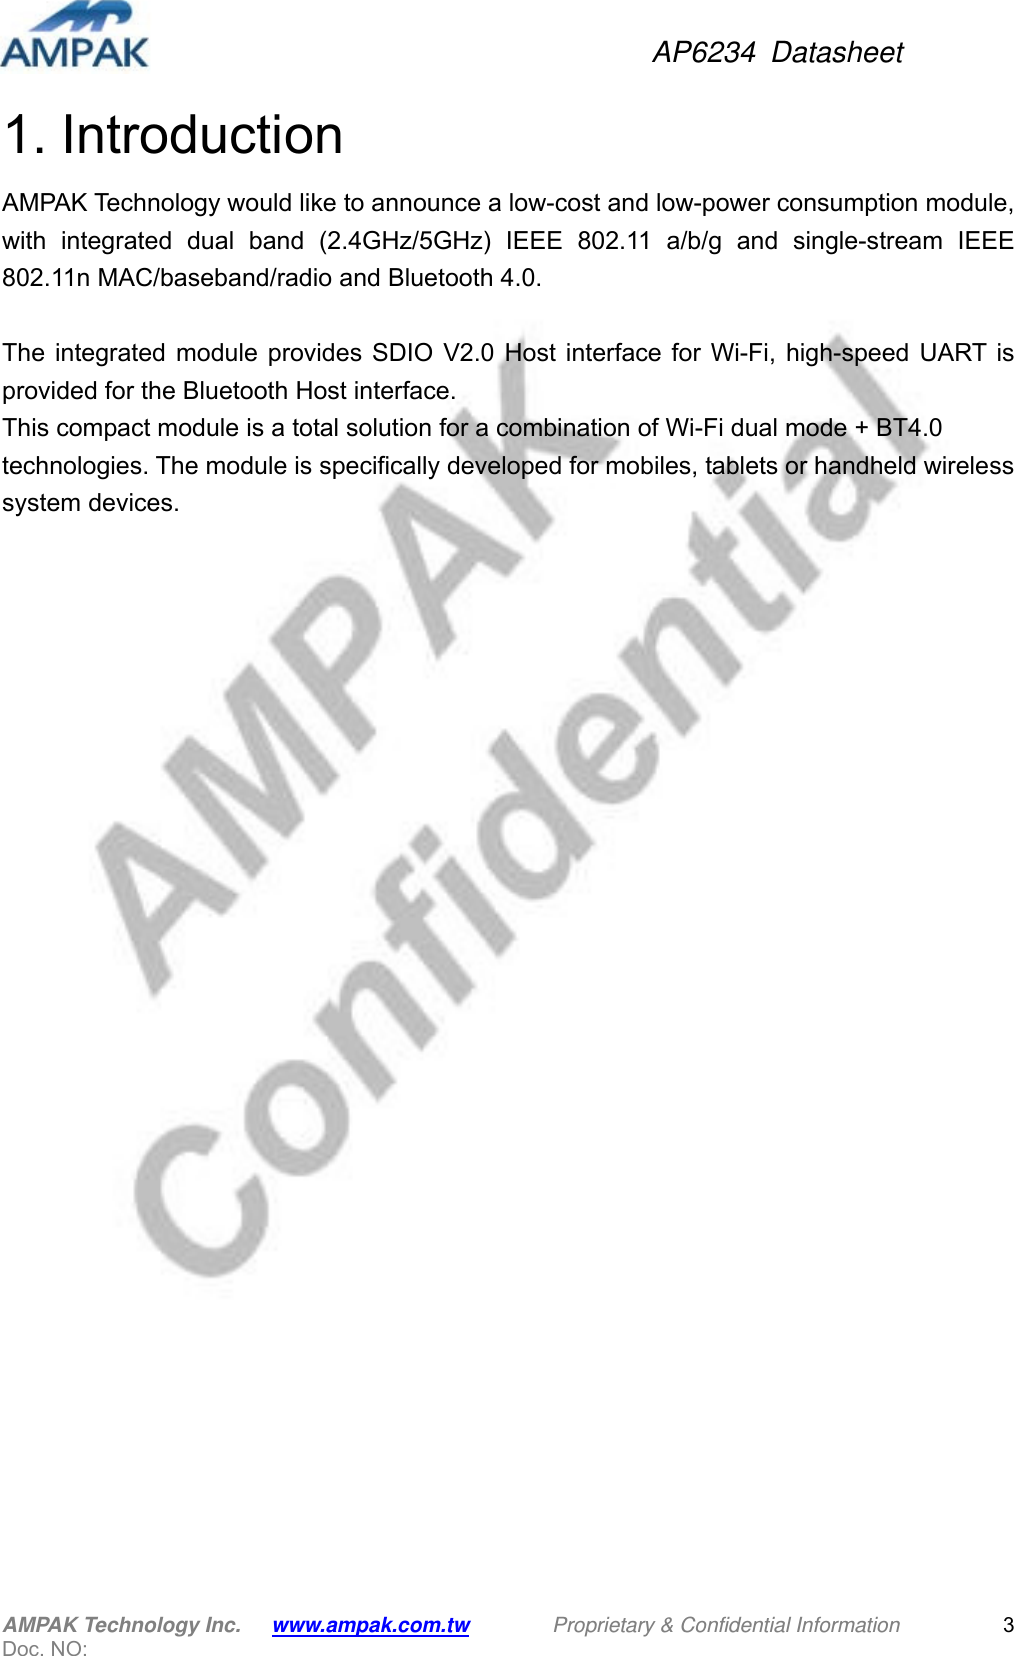 AP6234 Datasheet AMPAK Technology Inc.      www.ampak.com.tw        Proprietary &amp; Confidential Information       Doc. NO:   31. Introduction AMPAK Technology would like to announce a low-cost and low-power consumption module, with integrated dual band (2.4GHz/5GHz) IEEE 802.11 a/b/g and single-stream IEEE 802.11n MAC/baseband/radio and Bluetooth 4.0.  The integrated module provides SDIO V2.0 Host interface for Wi-Fi, high-speed UART is provided for the Bluetooth Host interface.   This compact module is a total solution for a combination of Wi-Fi dual mode + BT4.0 technologies. The module is specifically developed for mobiles, tablets or handheld wireless system devices.         